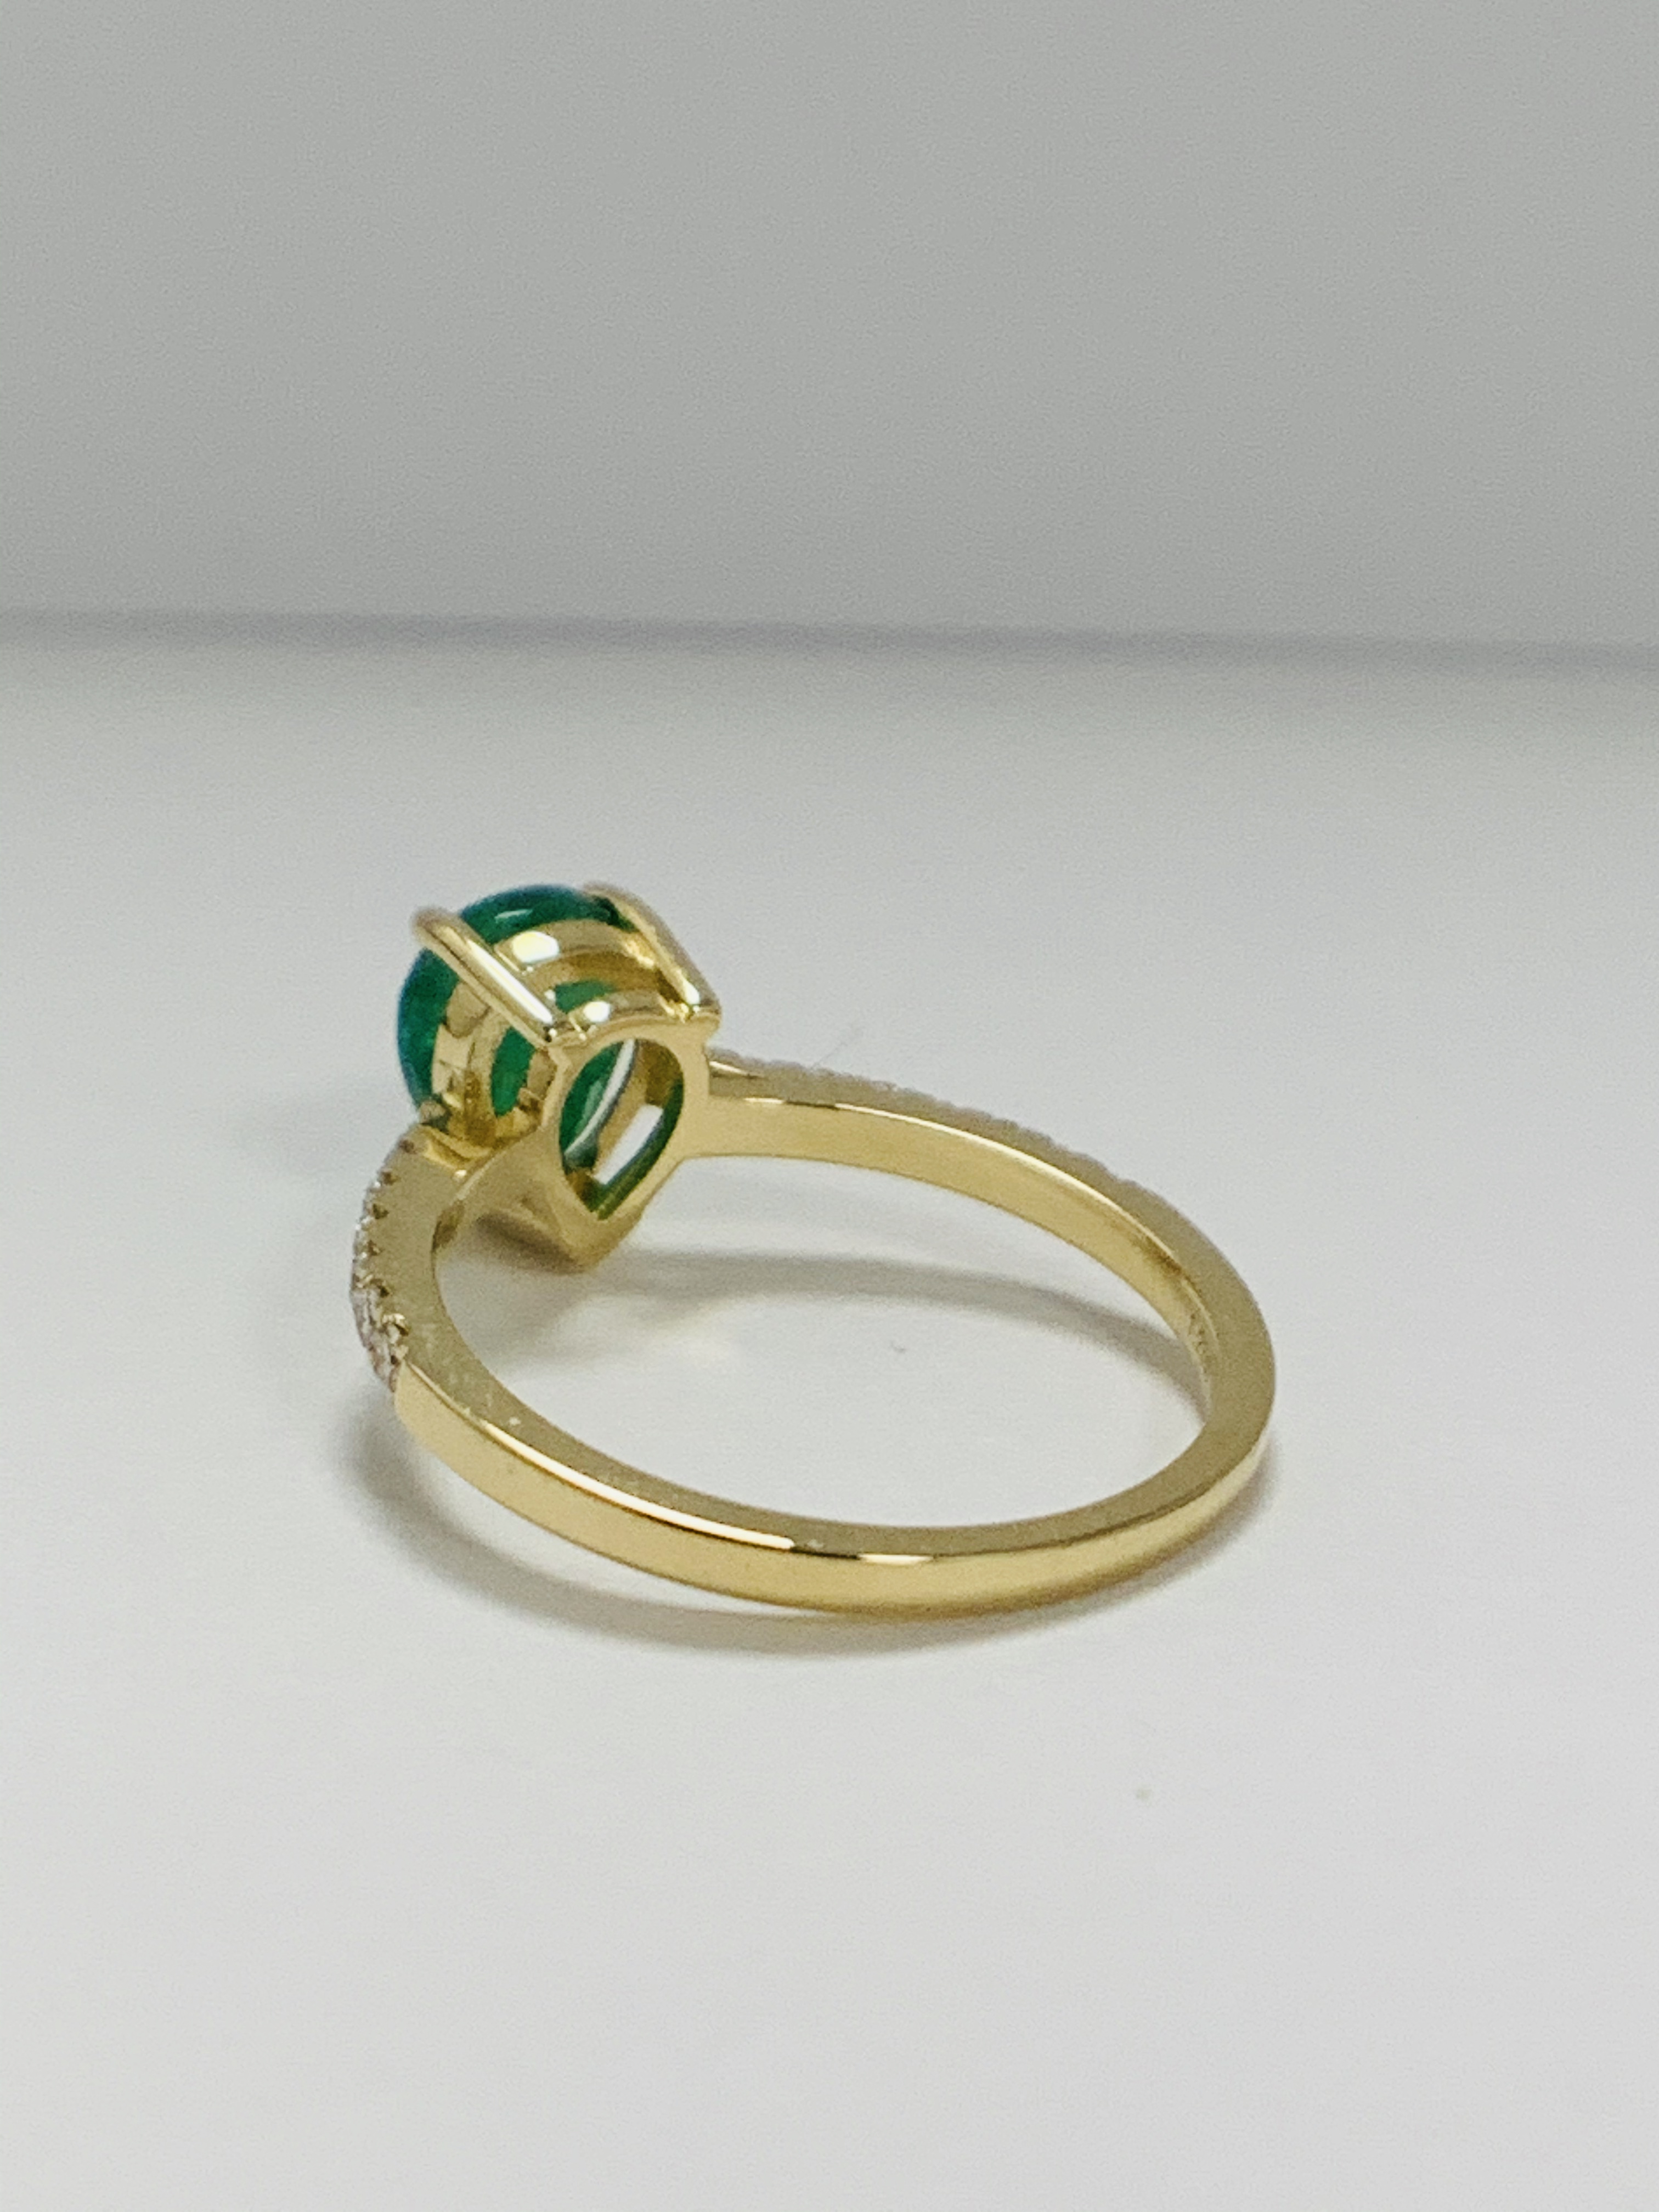 14ct Yellow Gold Emerald and Diamond ring featuring centre, pear cut, medium green Emerald (1.23ct), - Image 3 of 10